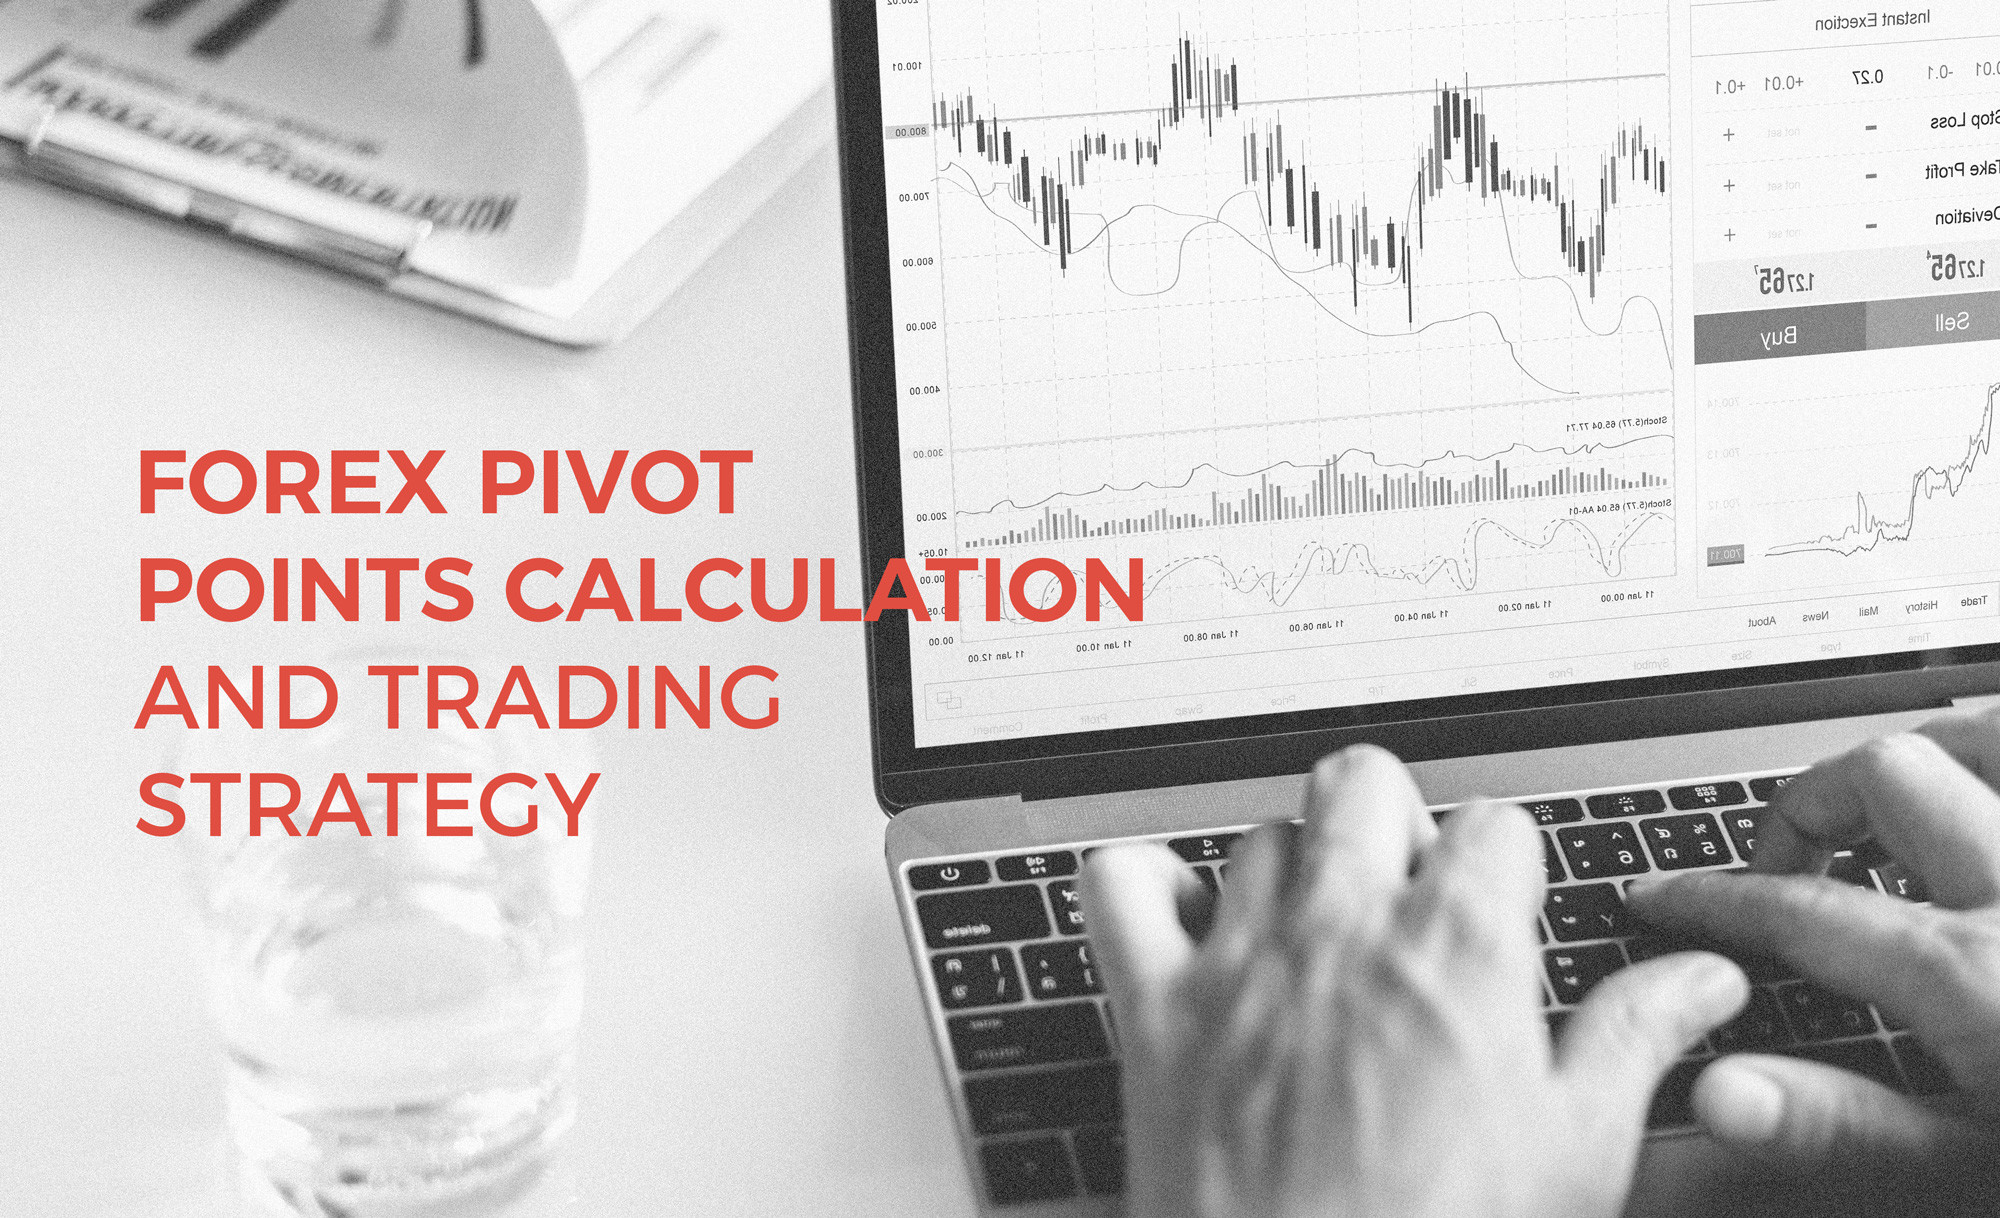 Forex Pivot Points Calculation and Trading Strategy